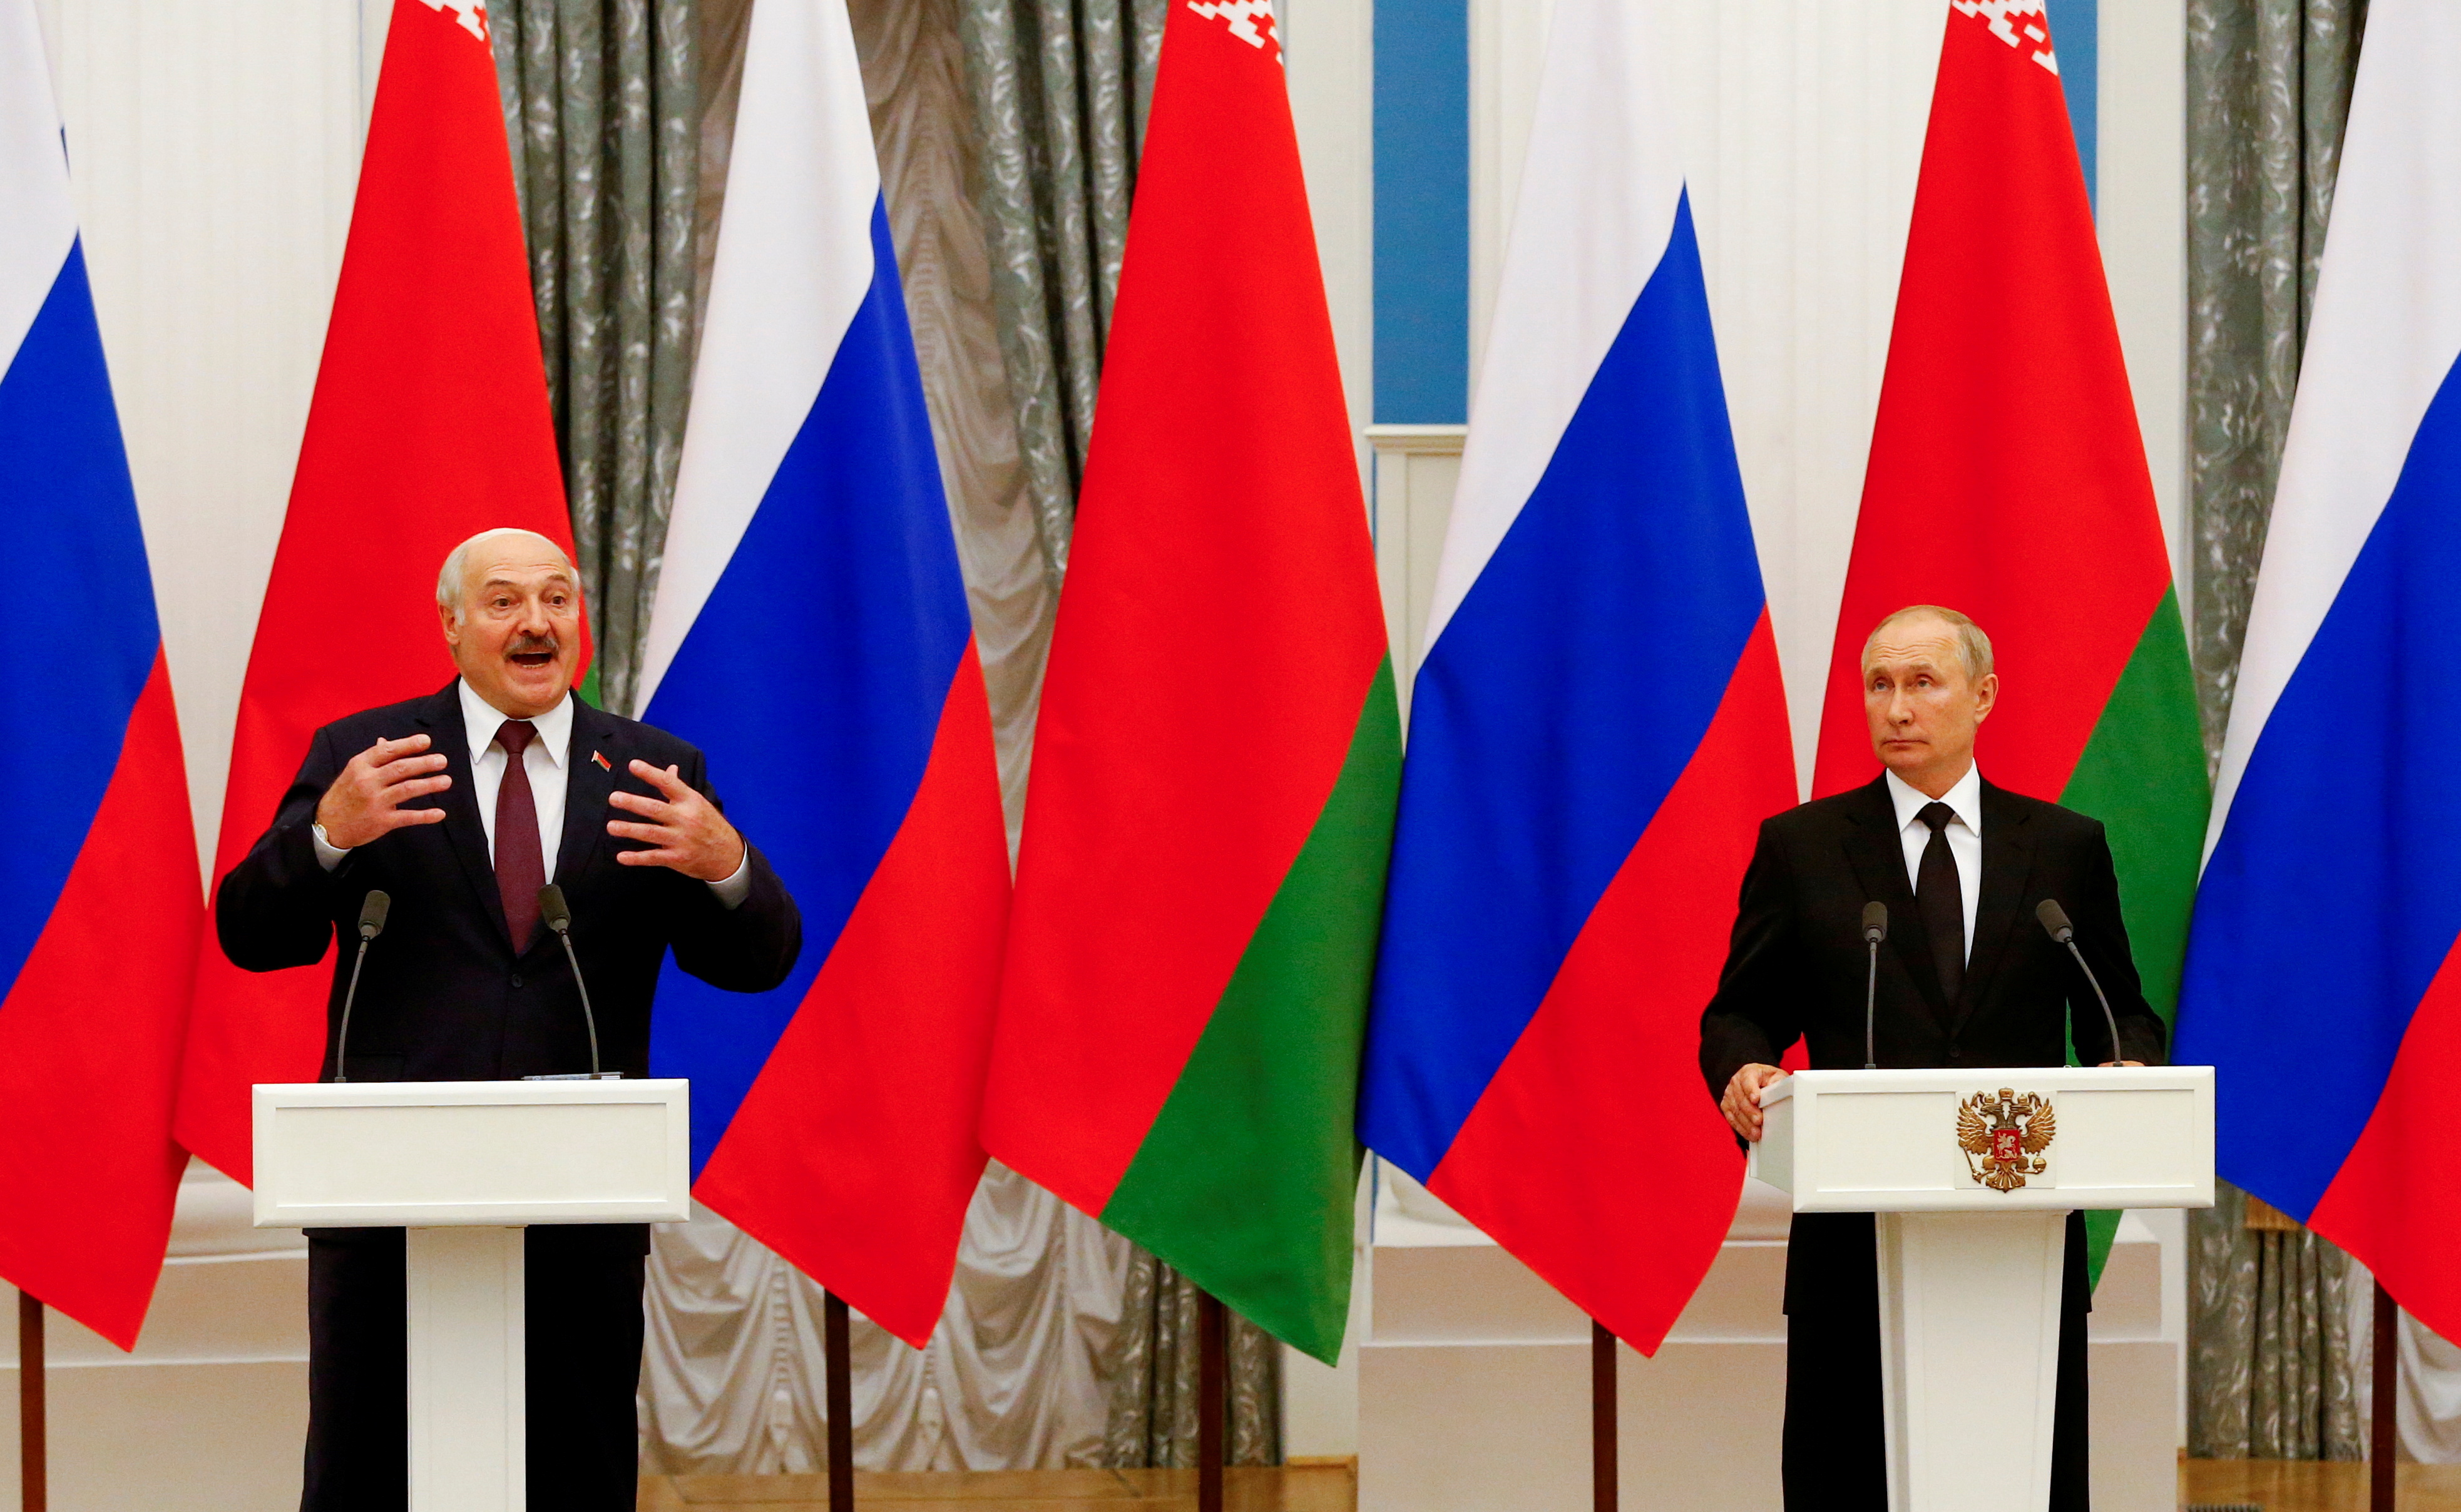 FILE PHOTO: Russian President Putin and Belarusian President Lukashenko attend a news conference in Moscow